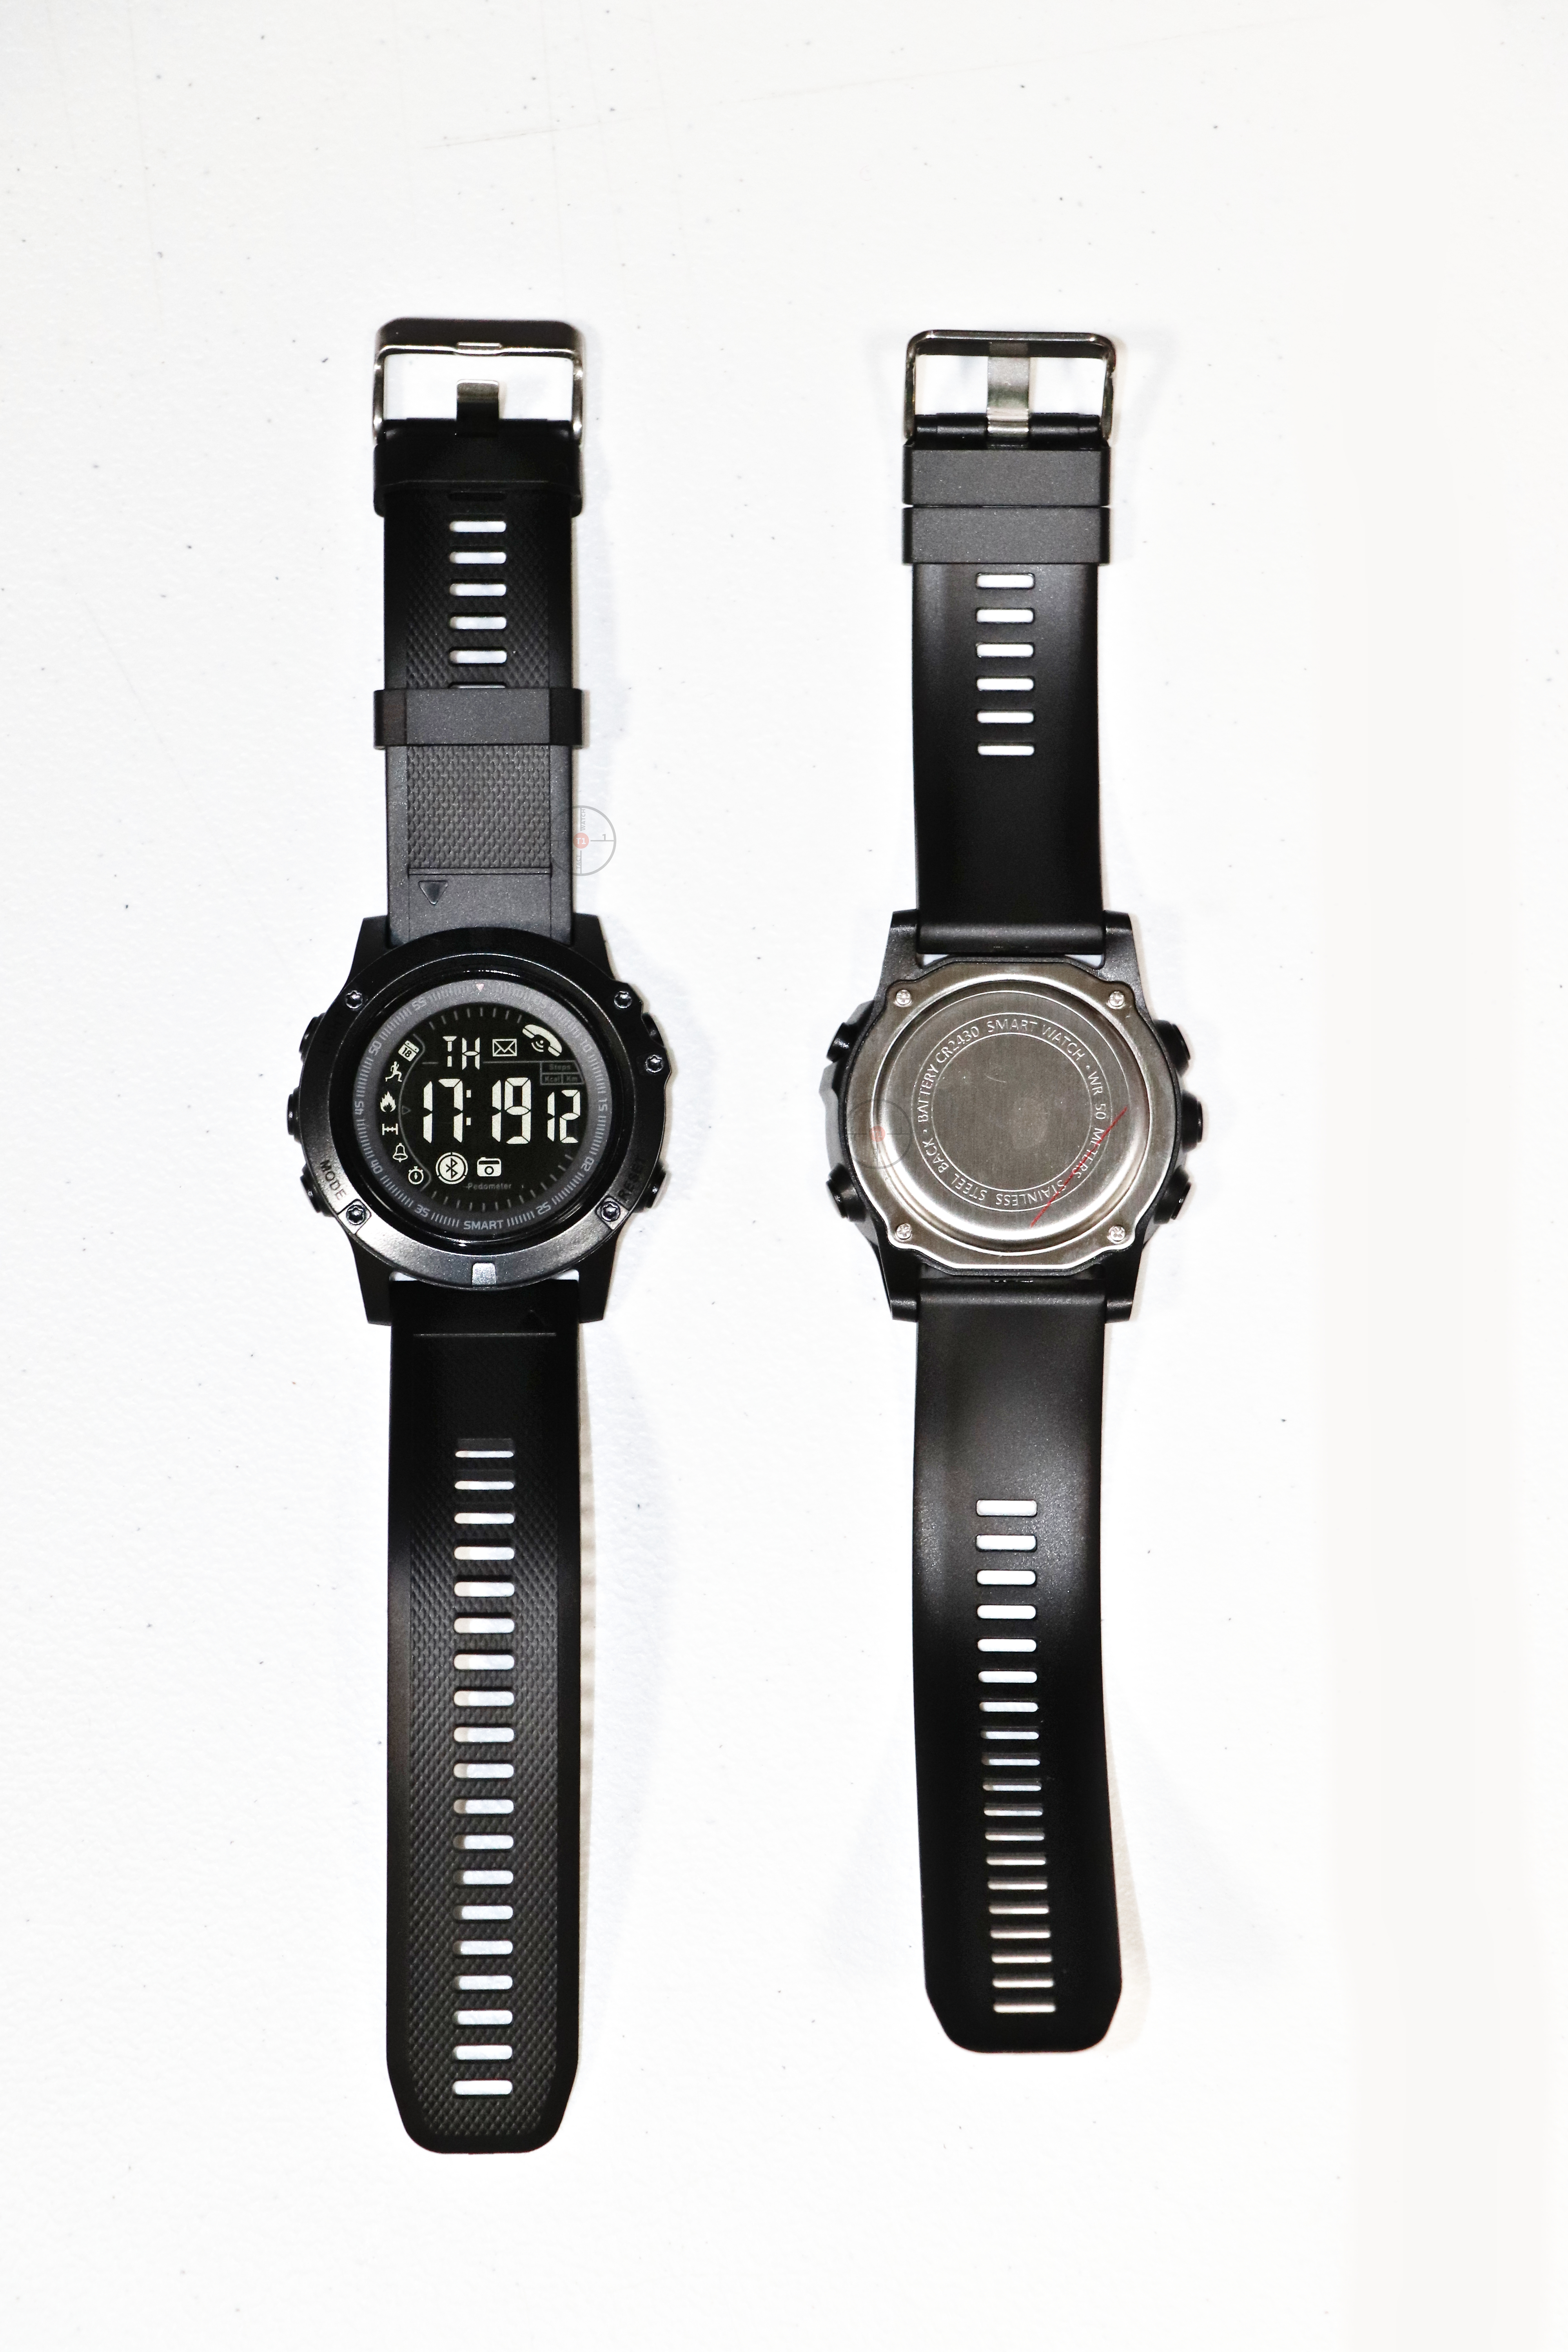 T1 Tact Watch, Debut Military Smartwatch, Now Comes With Free Tool Kit 4